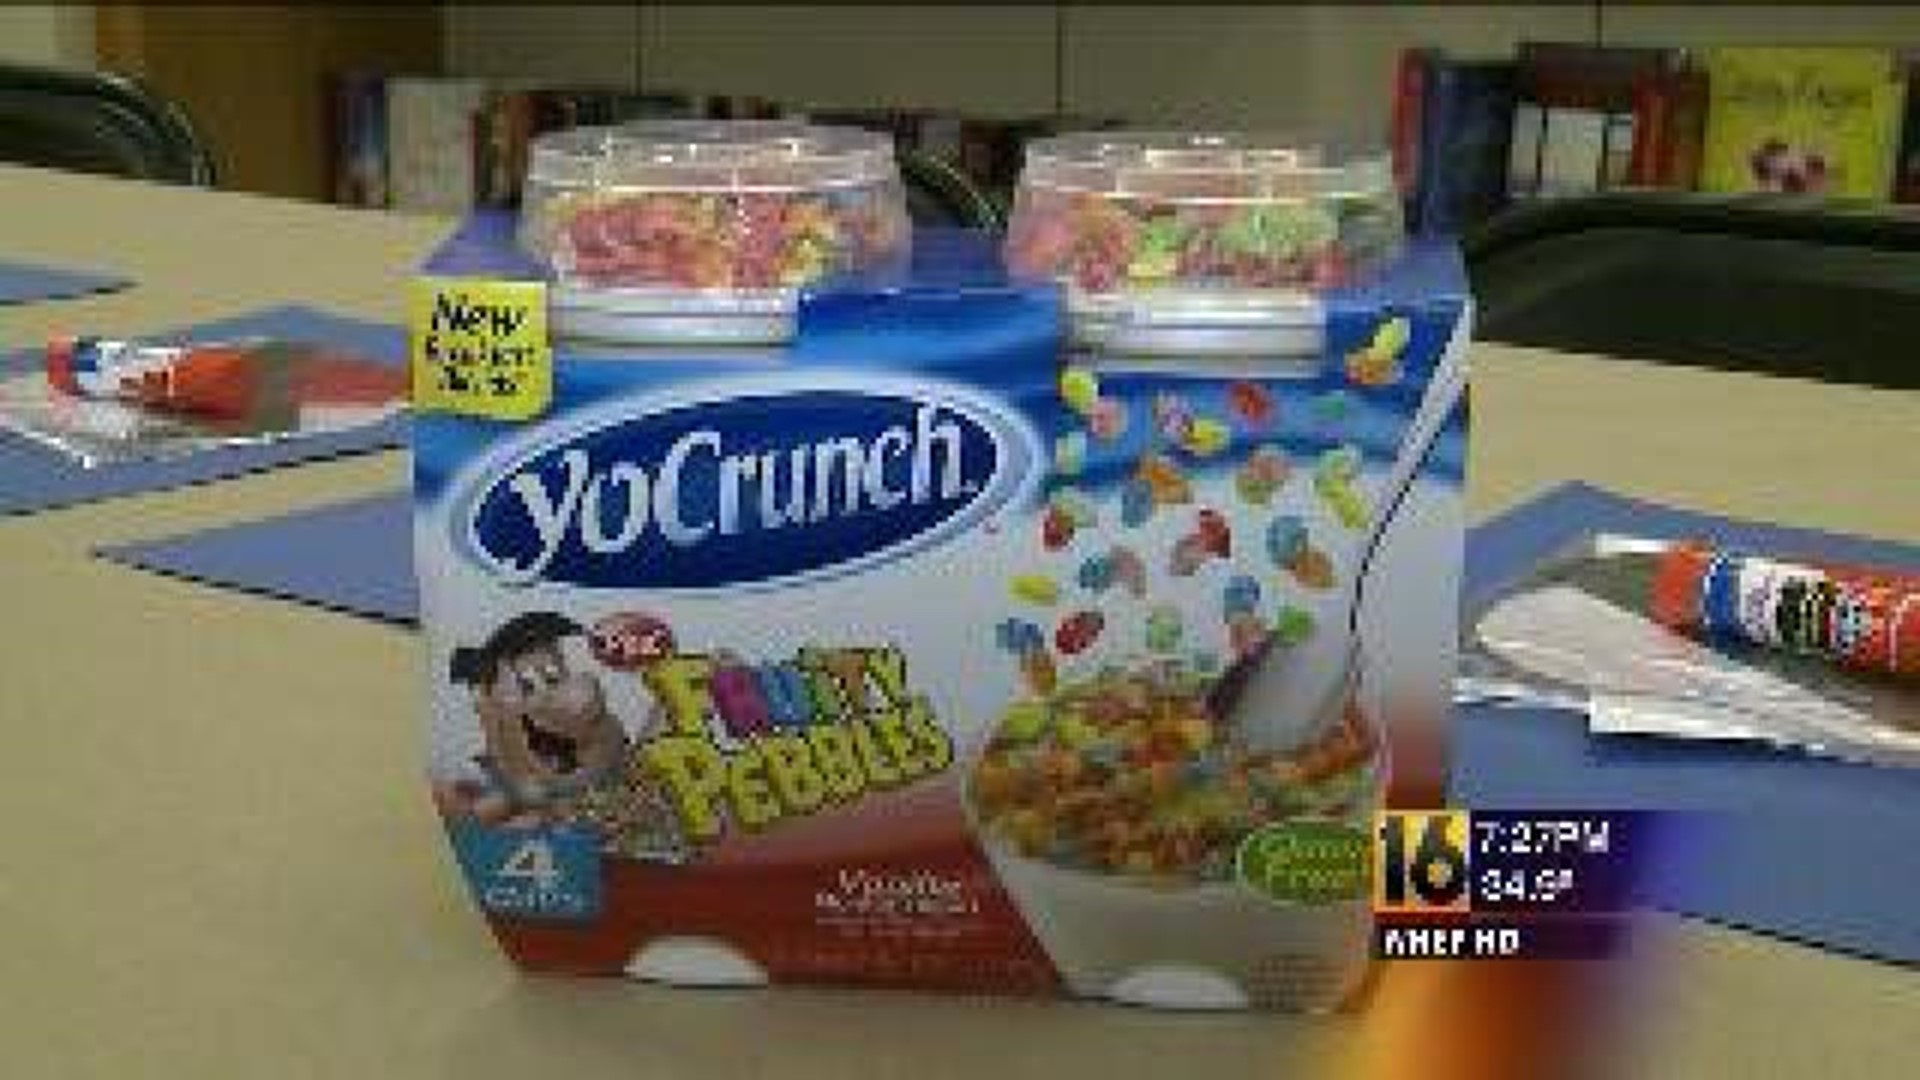 Taste Test: Yocrunch with Fruity Pebbles